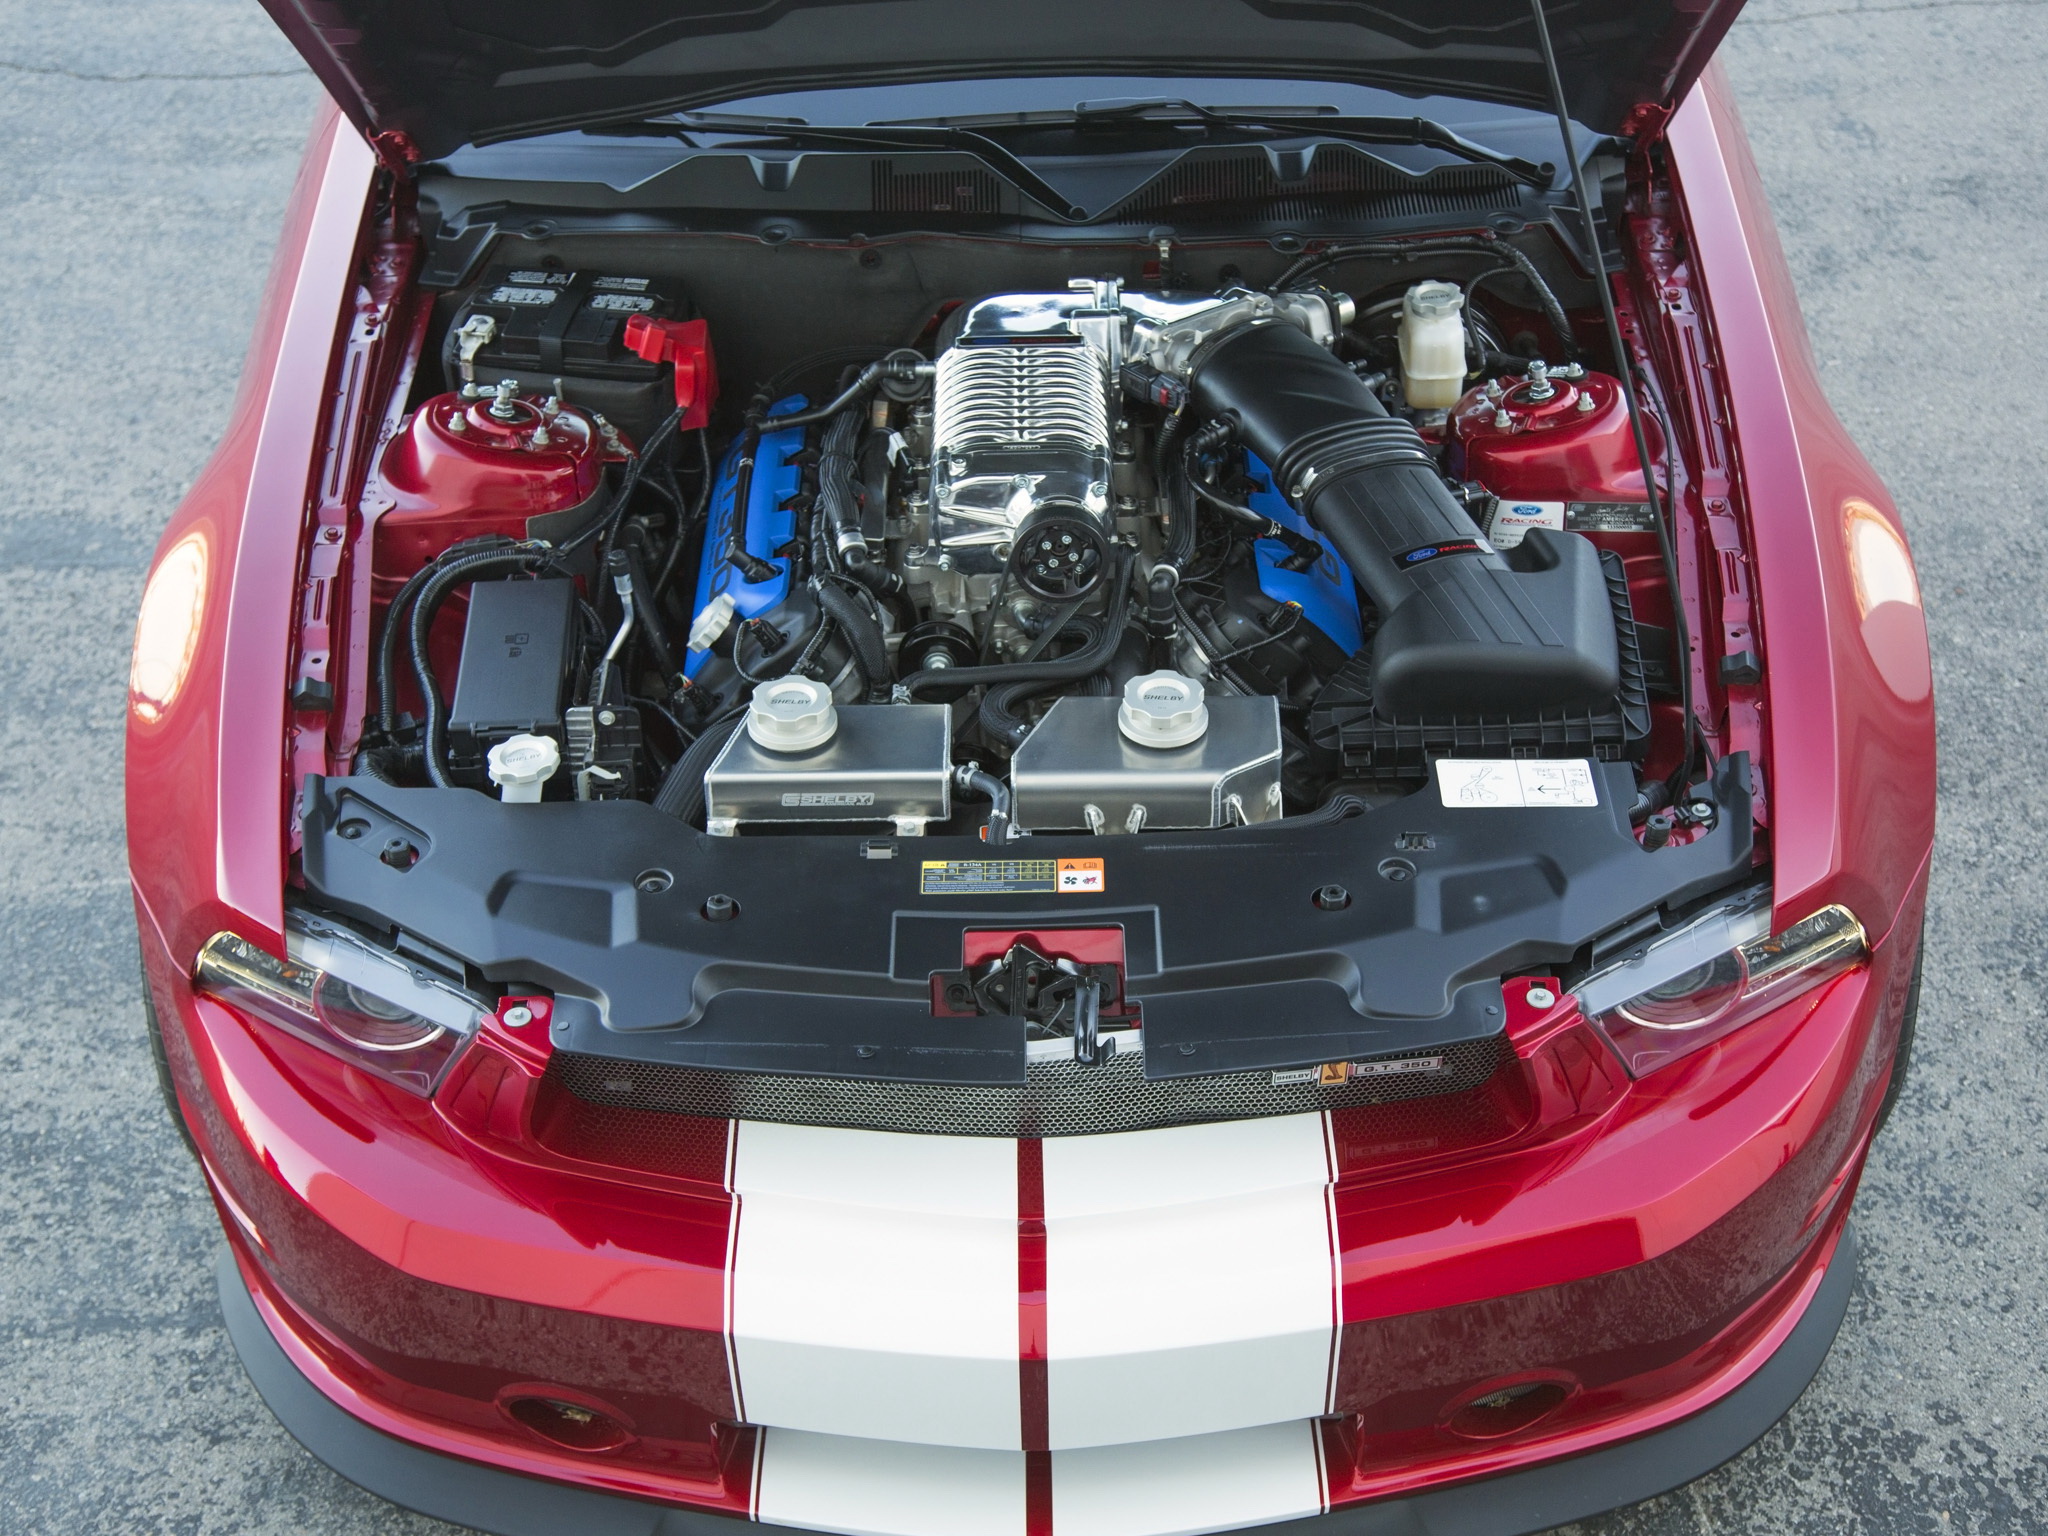 2010, Shelby, Gt350, Ford, Mustang, Muscle, Engine Wallpaper